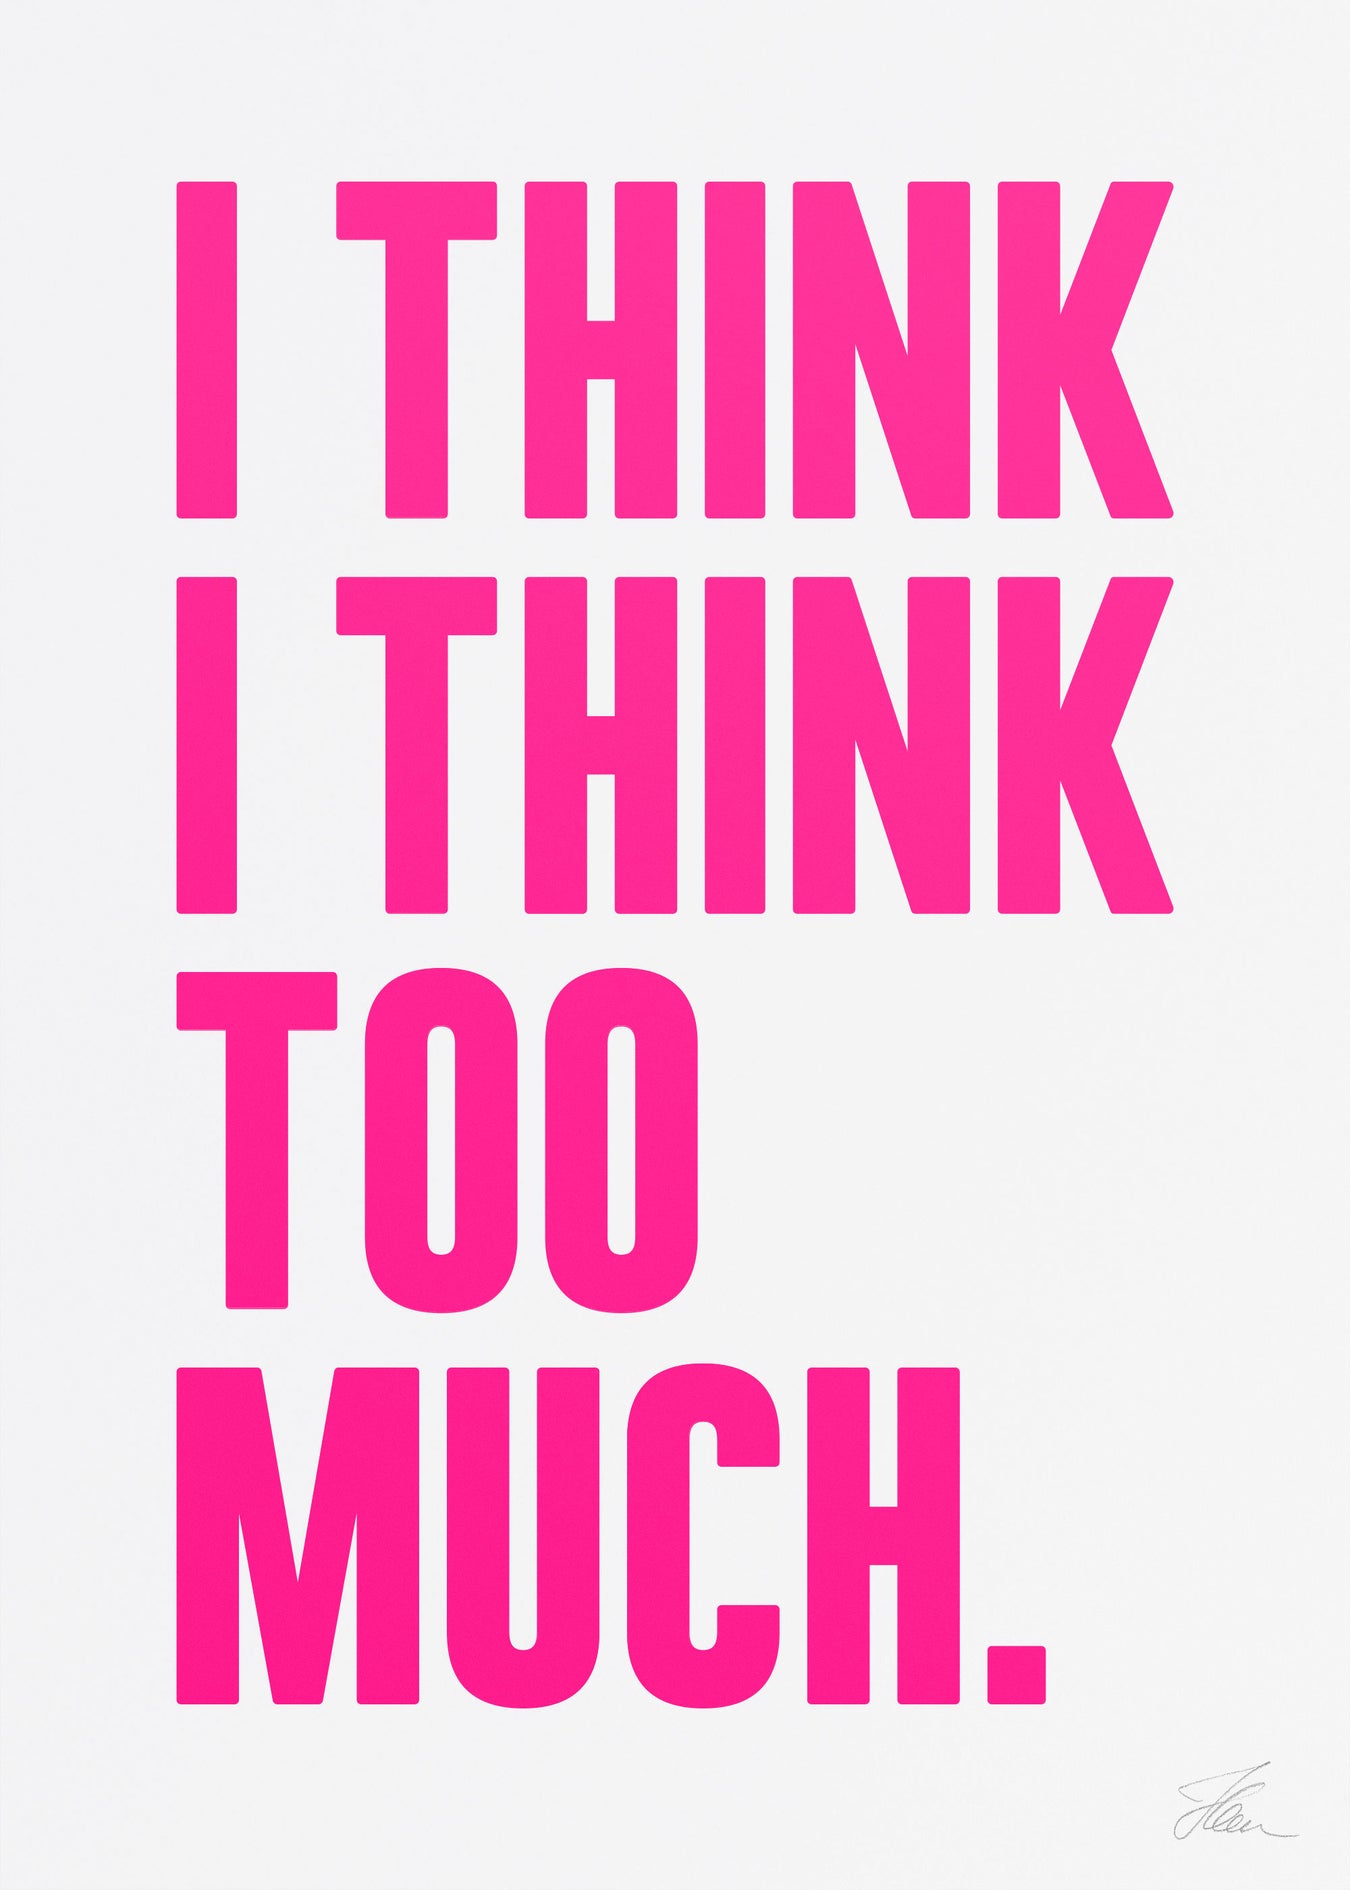 I think I think too much